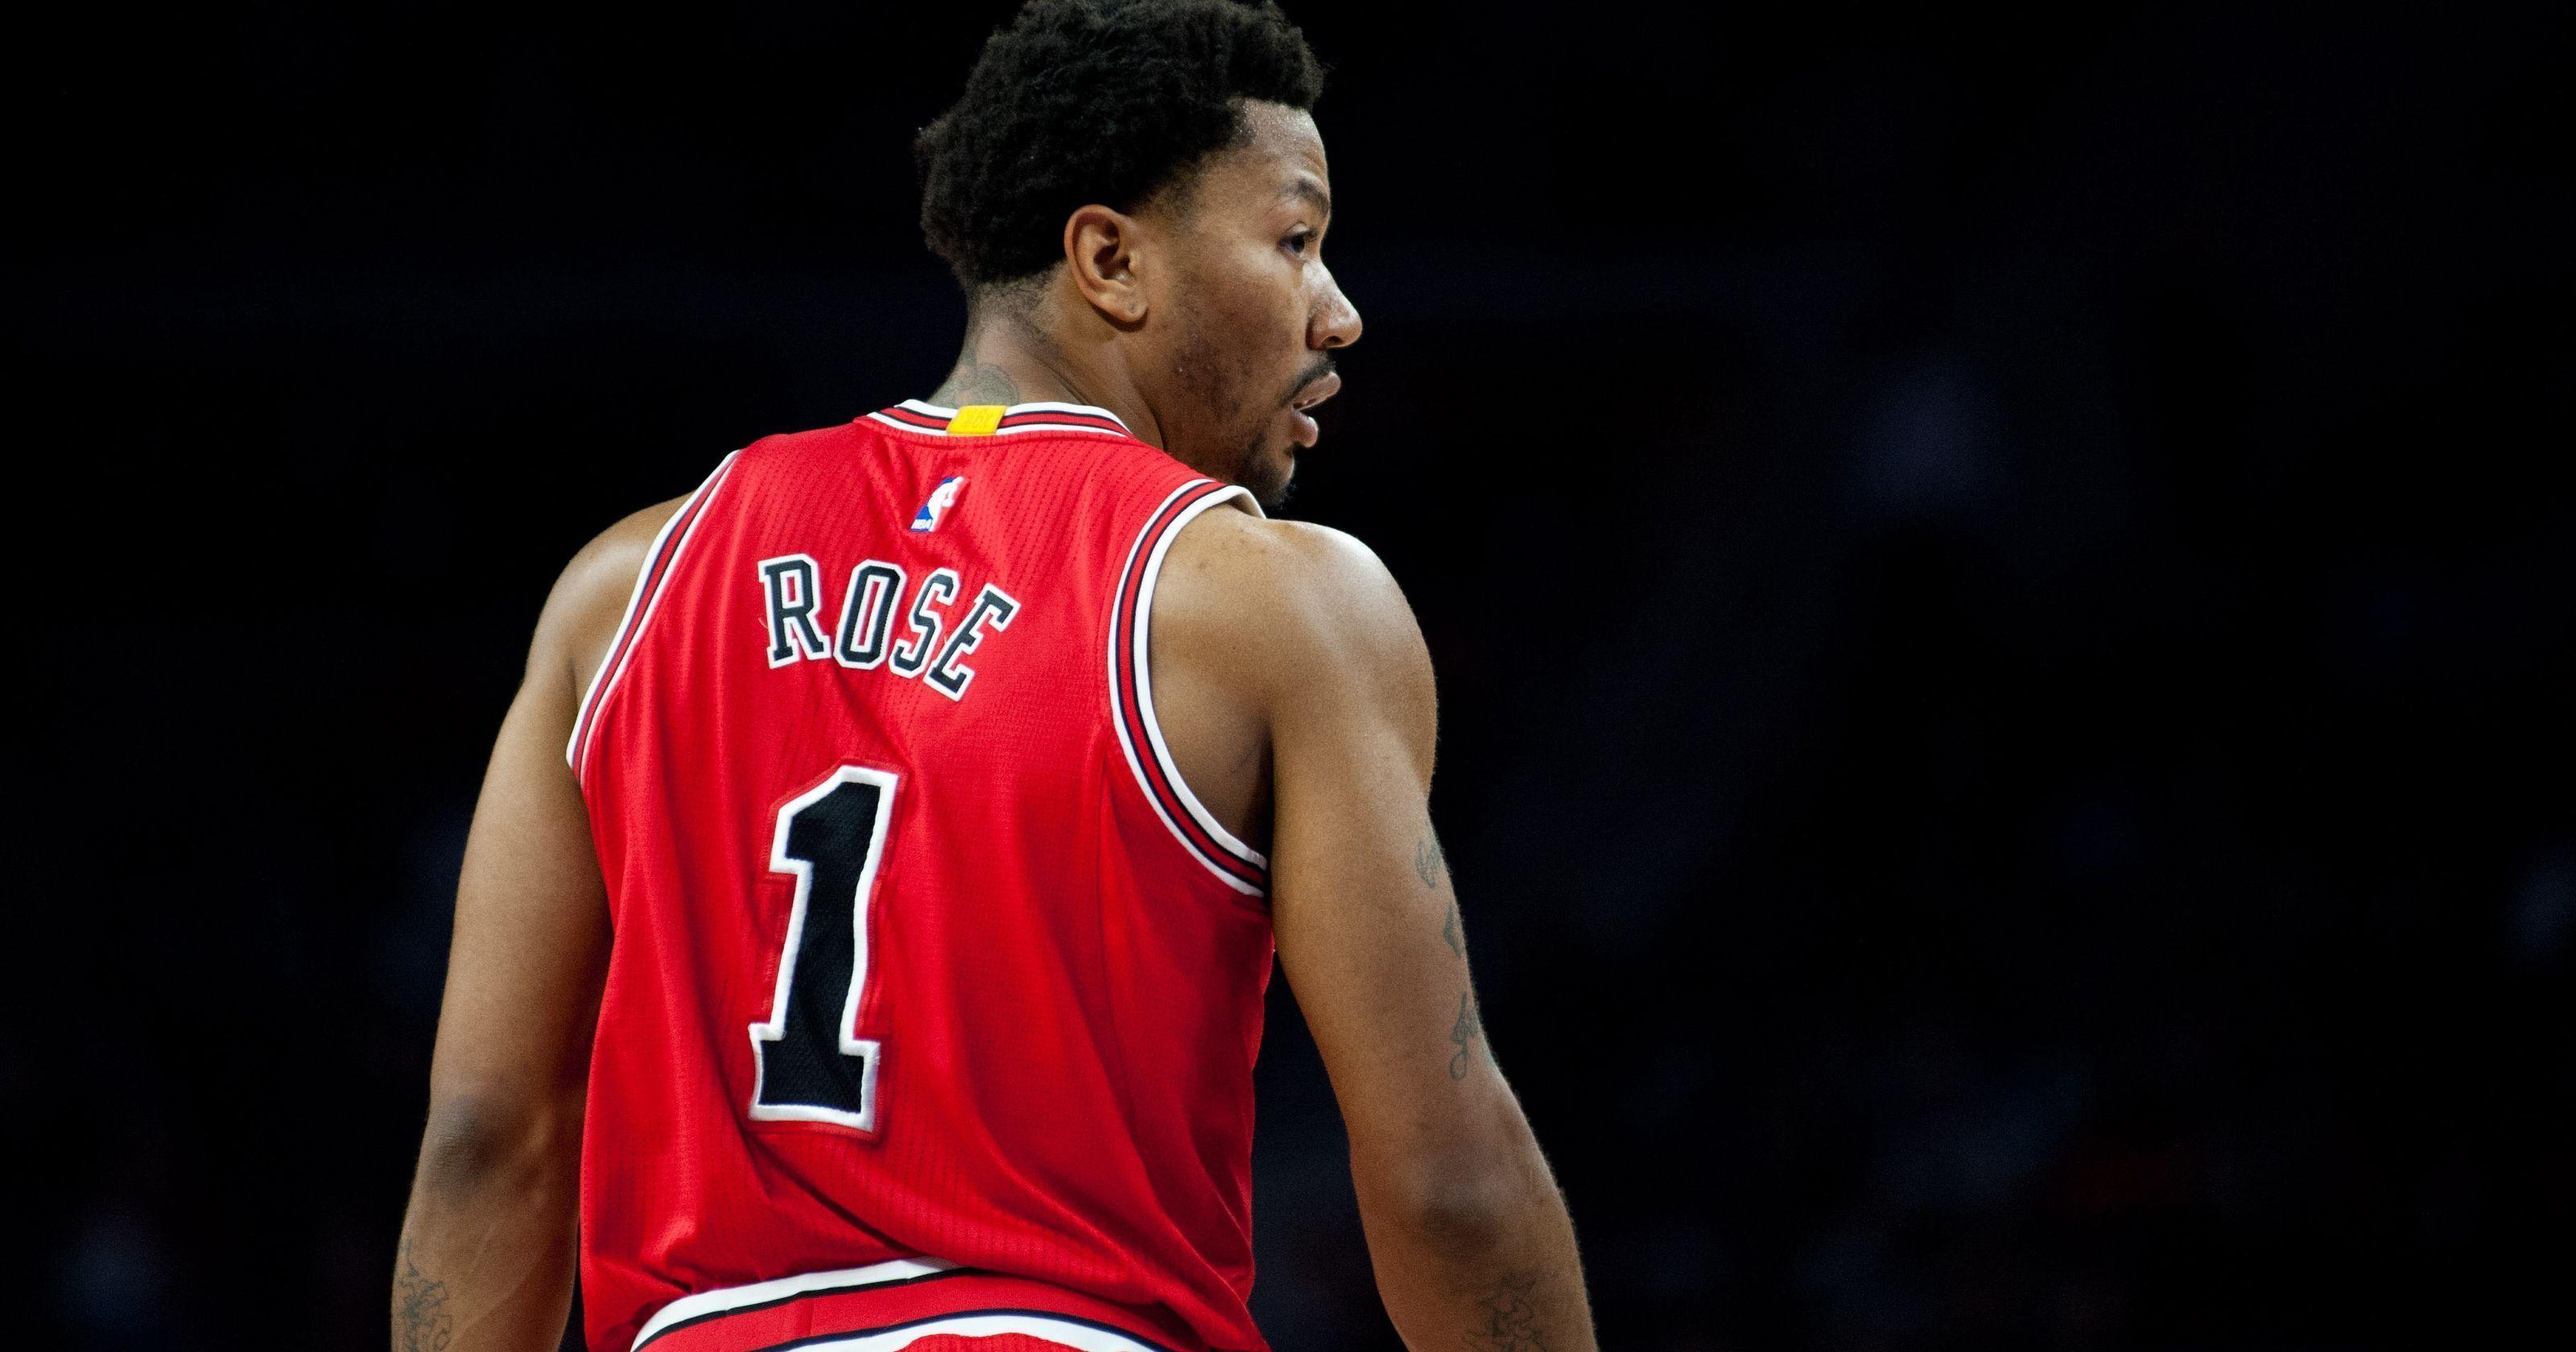 Awesome Derrick Rose HQ Wallpaper. Full HD Picture